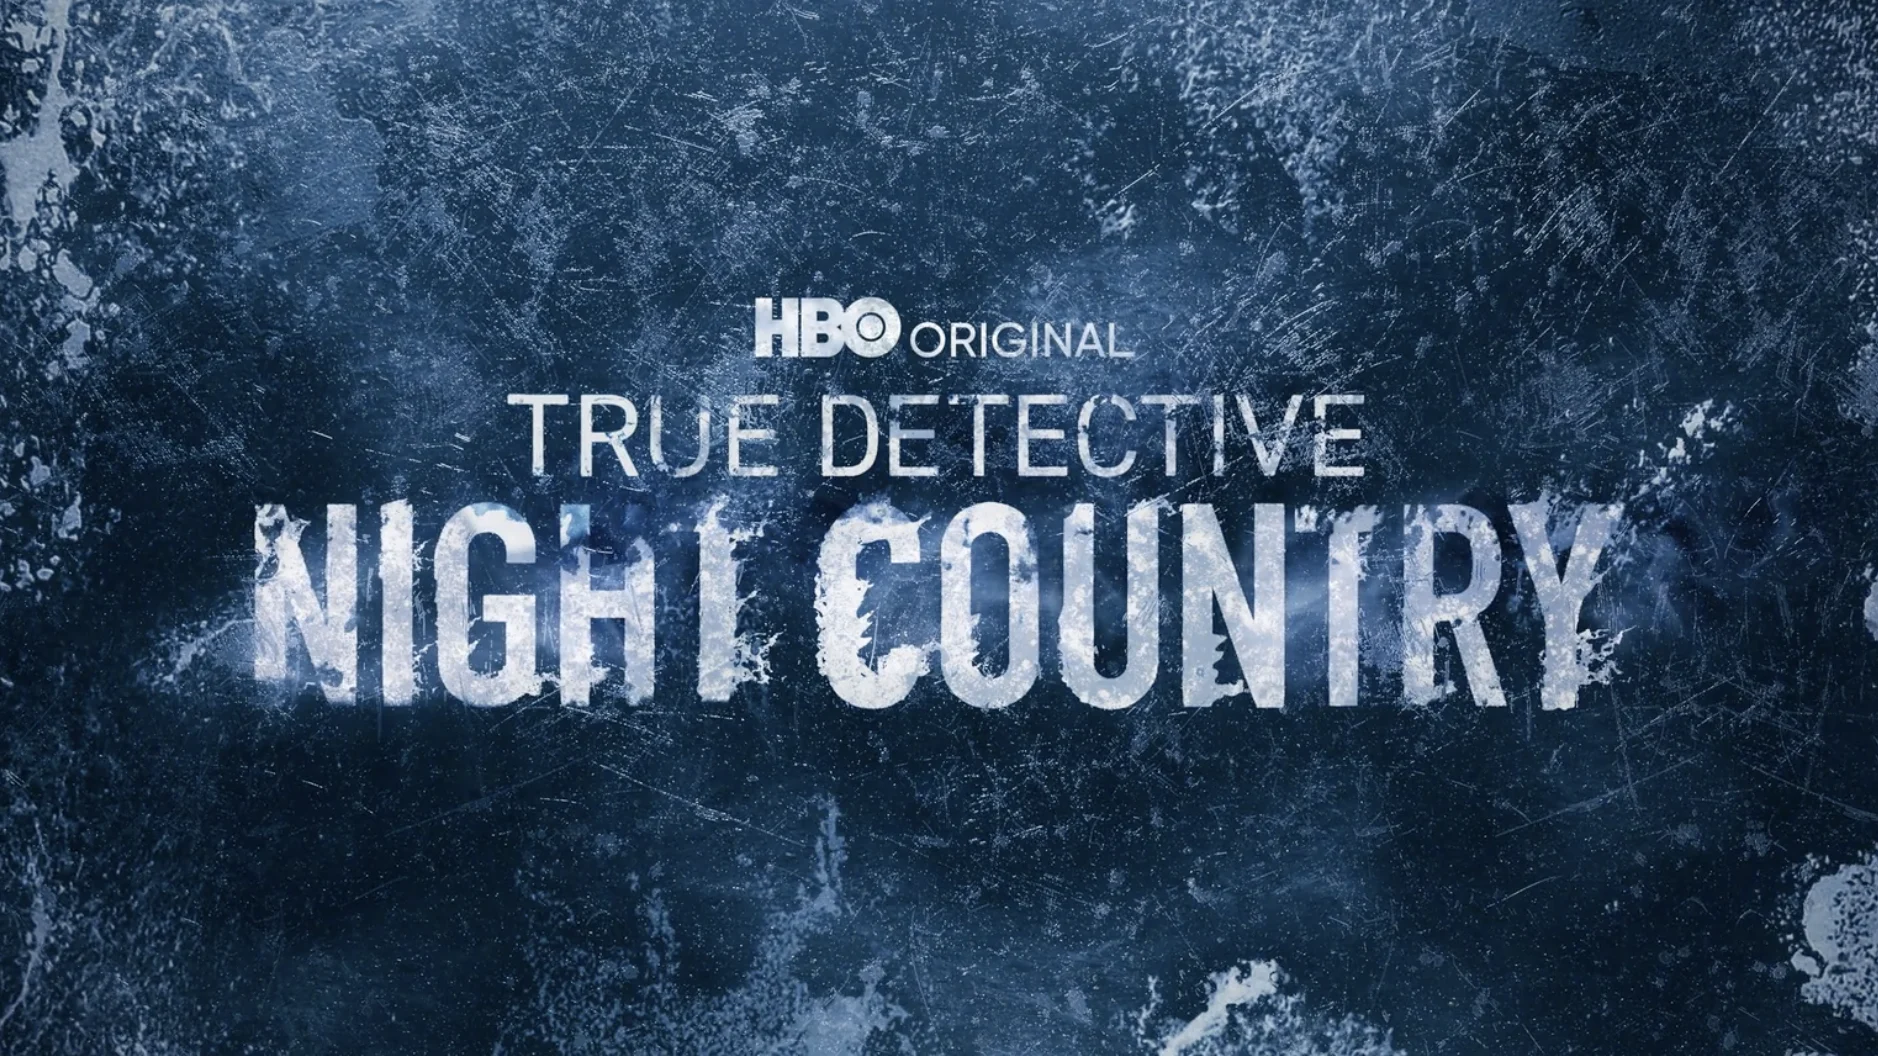 The fourth season of HBO’s critically acclaimed original series, True Detective, takes the detective procedural to a far remote location in Alaska and BGSTR designed an icy promo package for the network’s marketing efforts ahead of the season premiere. 